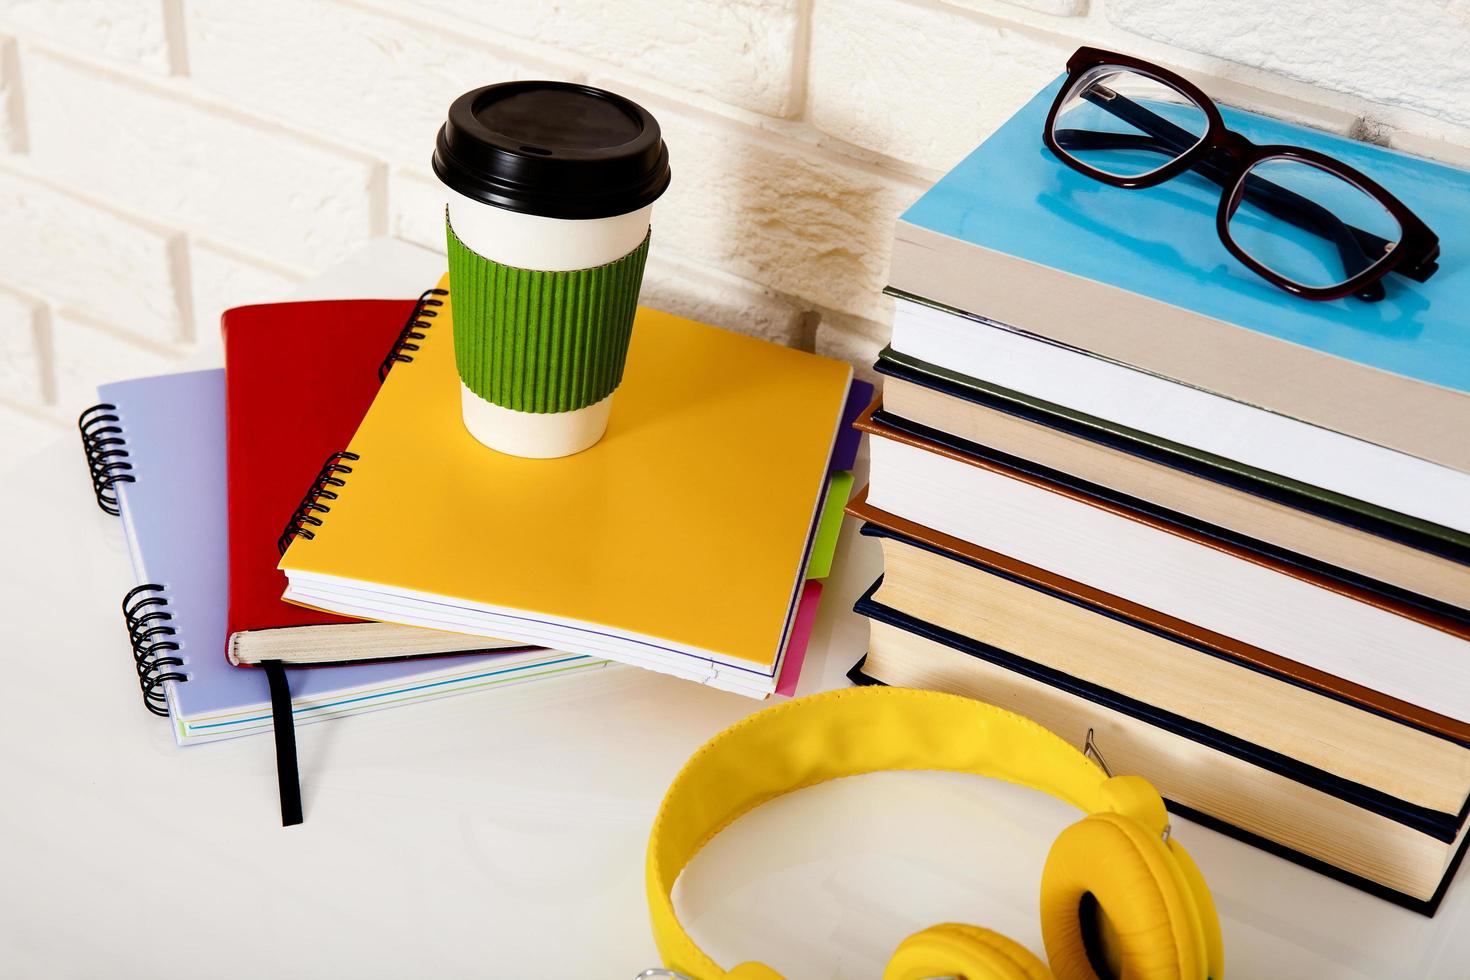 Workspace and education accessories on the table. Cup of coffee, books, glasses, notebooks, headphones. Stem education photo